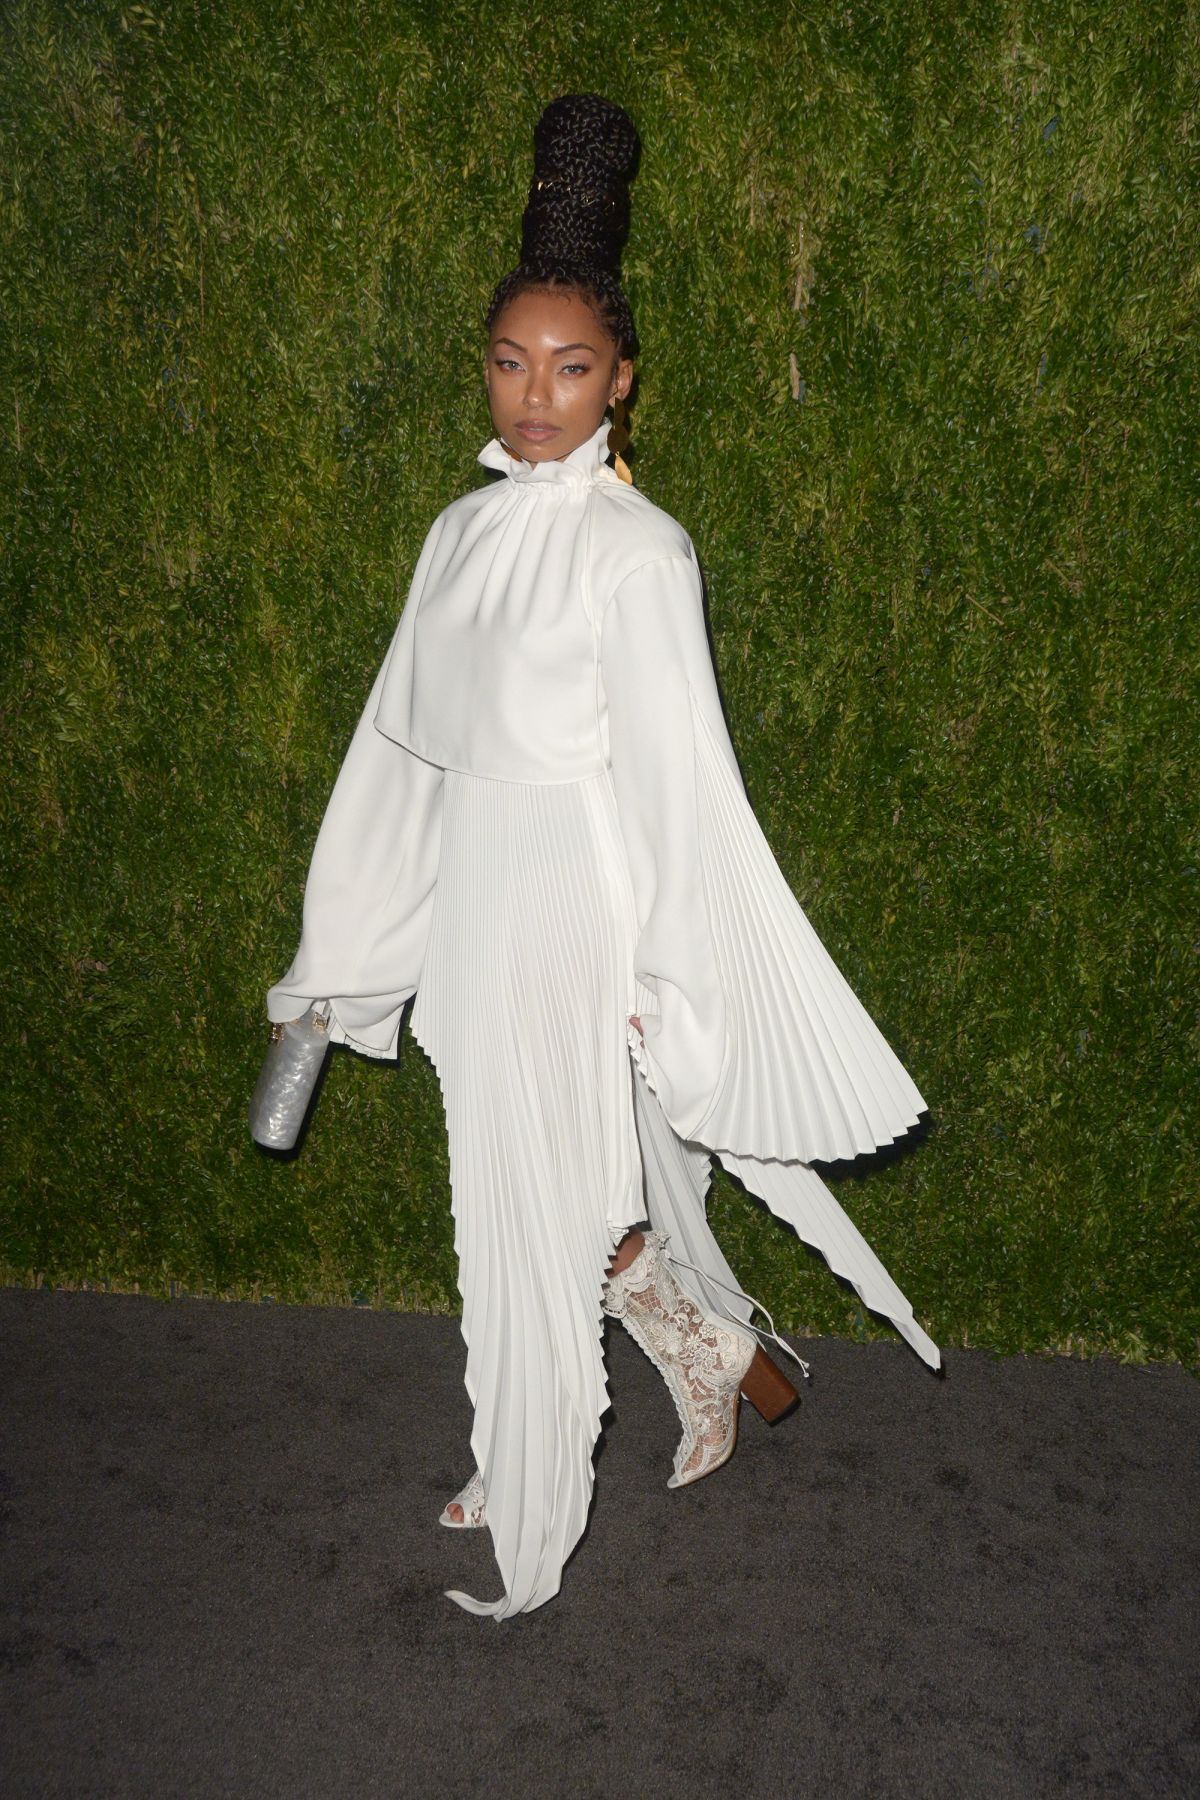 LOGAN BROWNING at Cfda/Vouge Fashion Fund 15th Anniversary in New York ...